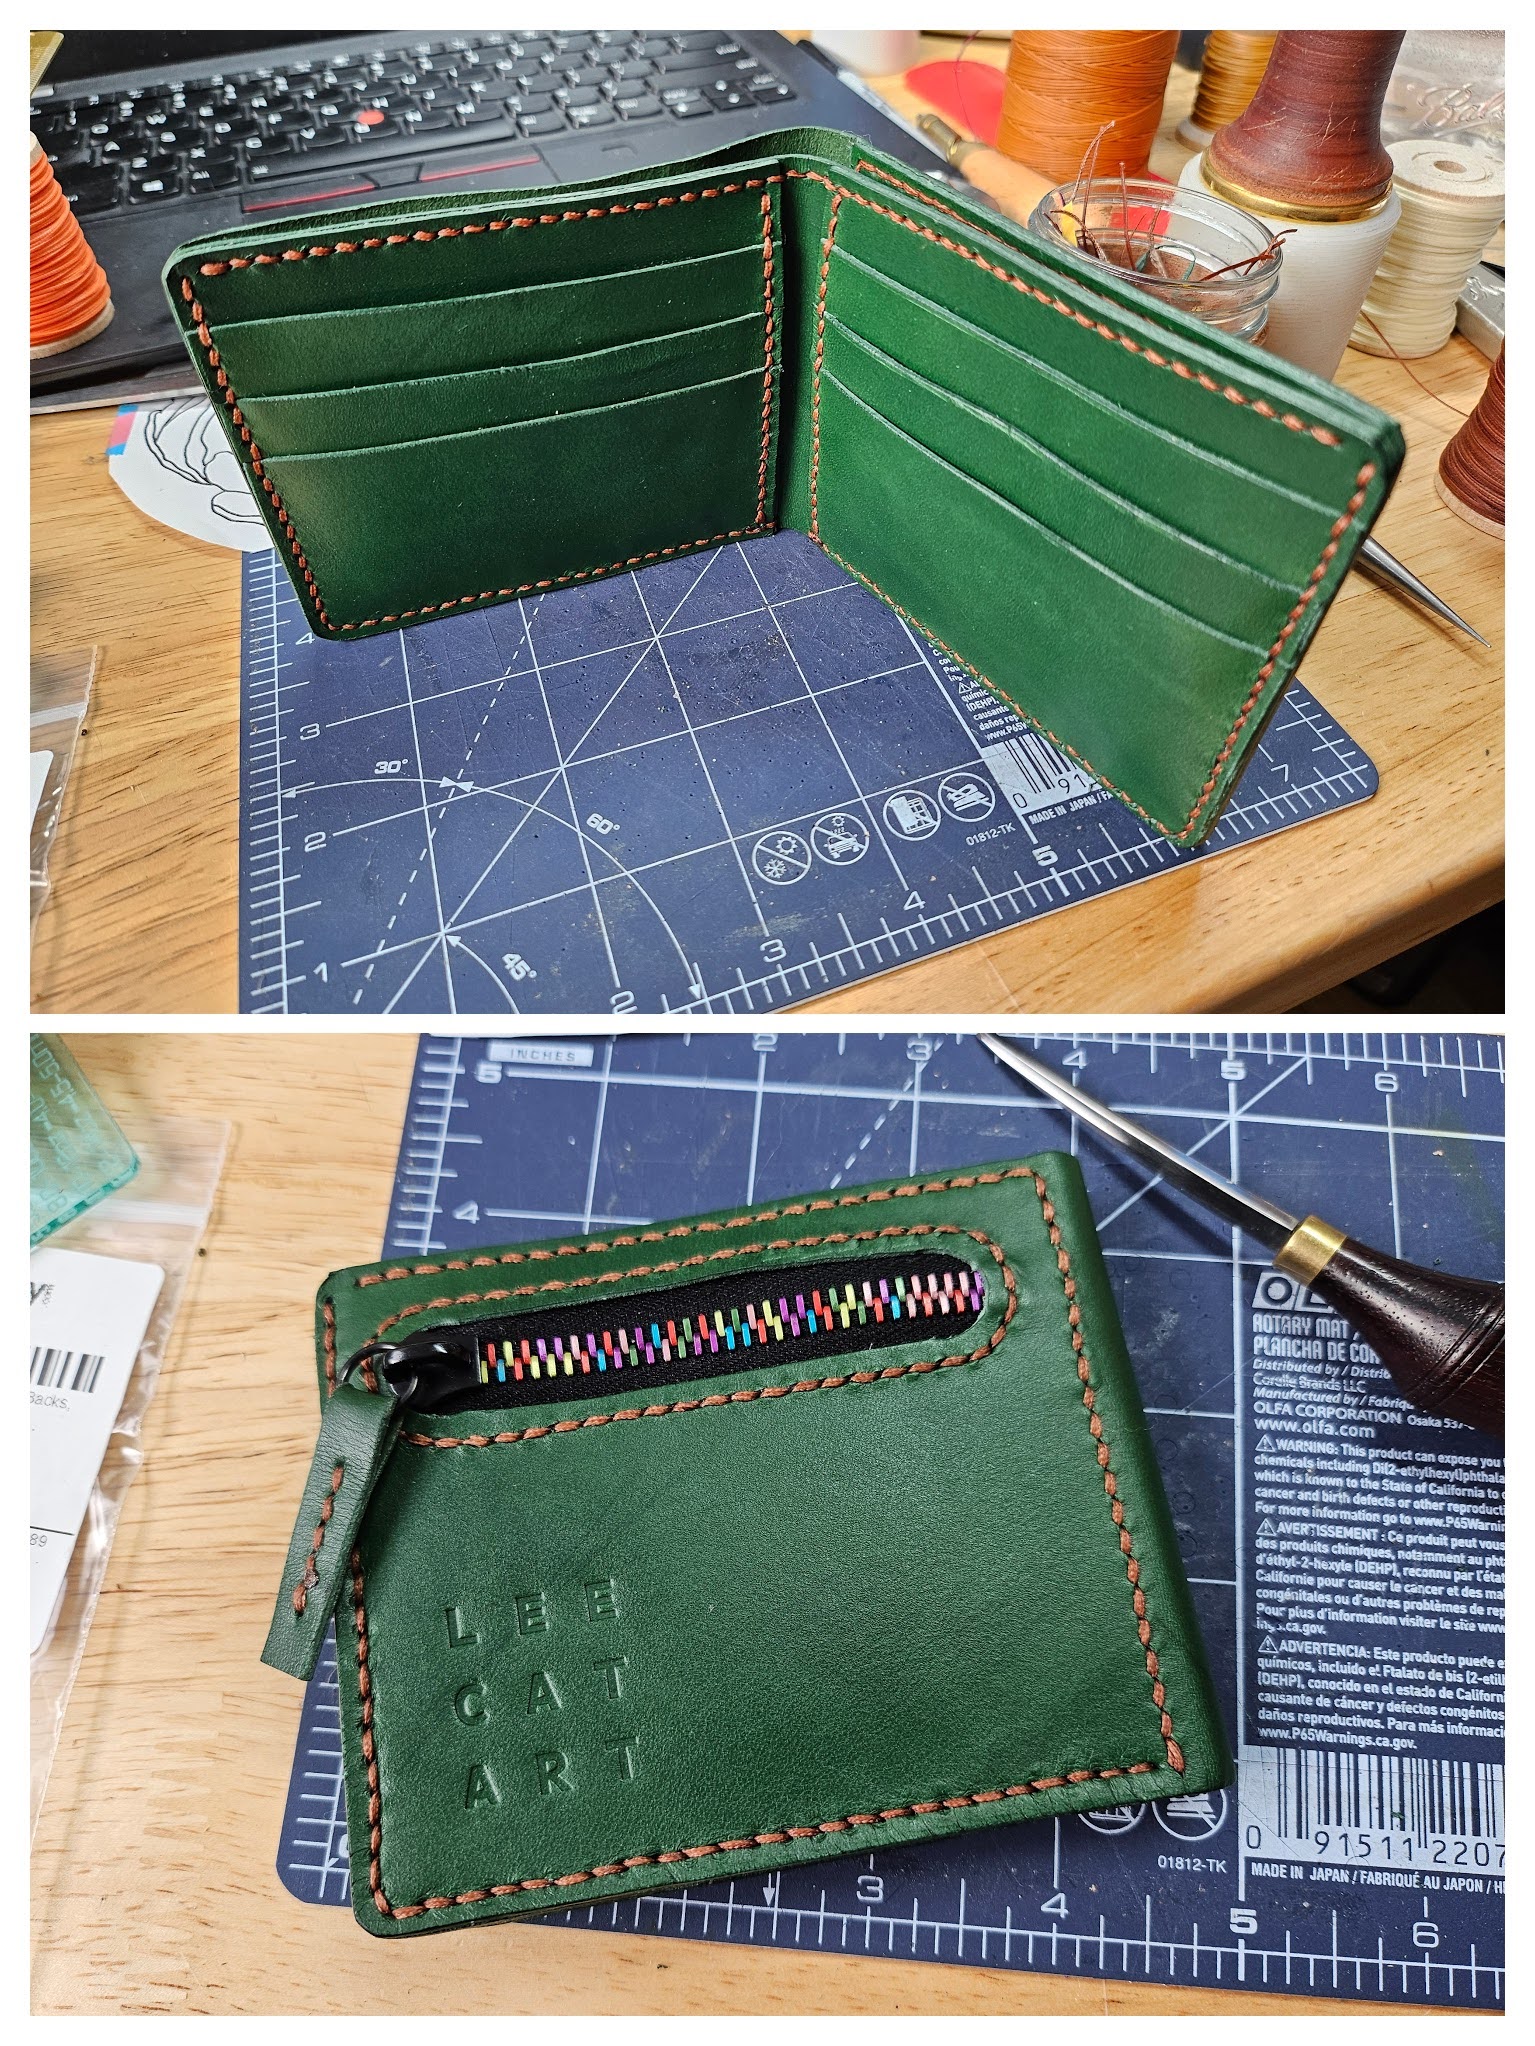 A collage showing a green leather wallet with a zippered pocket built into one external side.